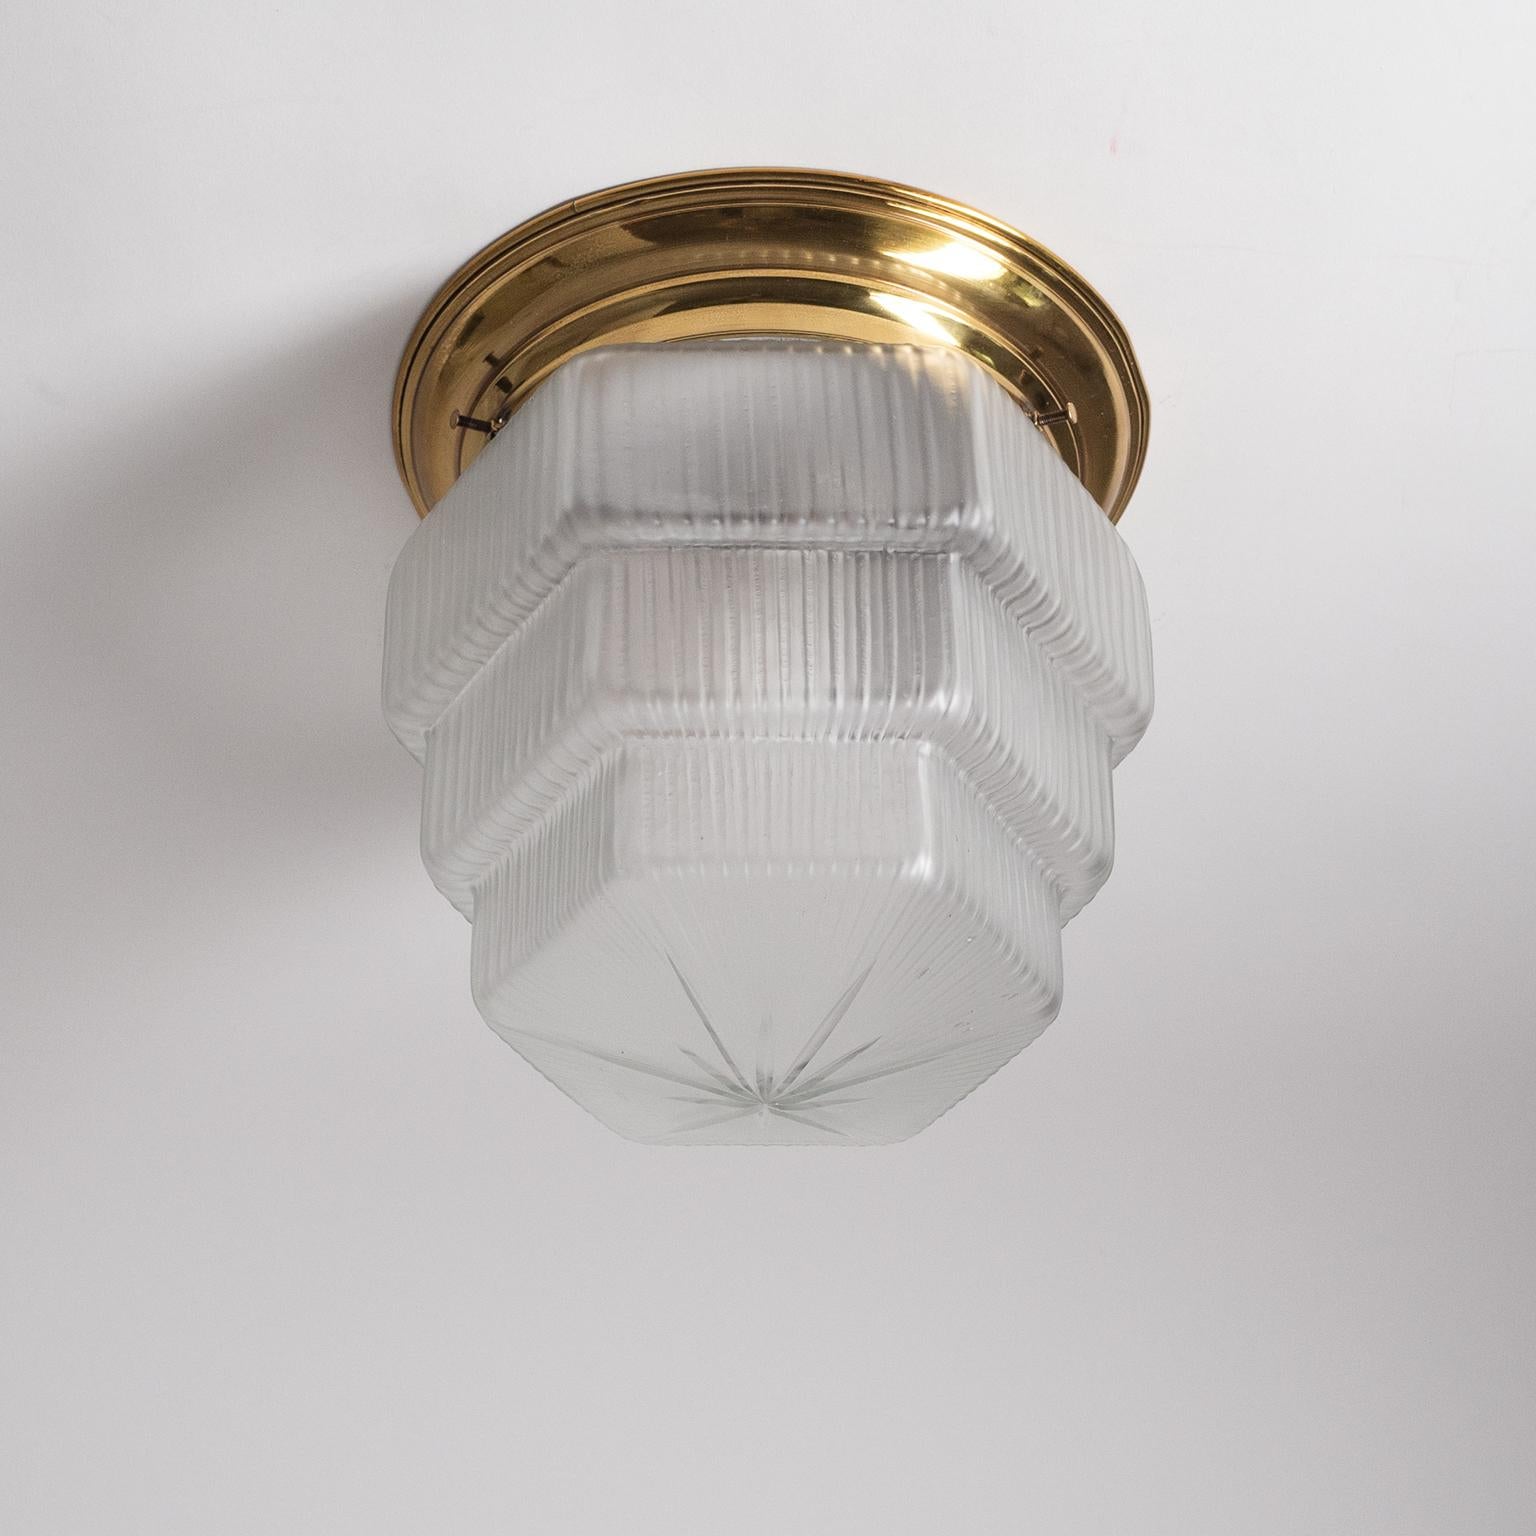 Rare Austrian brass and glass flush mount from the 1920-1930s. Brass backplate with an unusual, tiered, ribbed and cut glass diffuser with a satin finish. One original brass and ceramic E27 socket with new wiring.